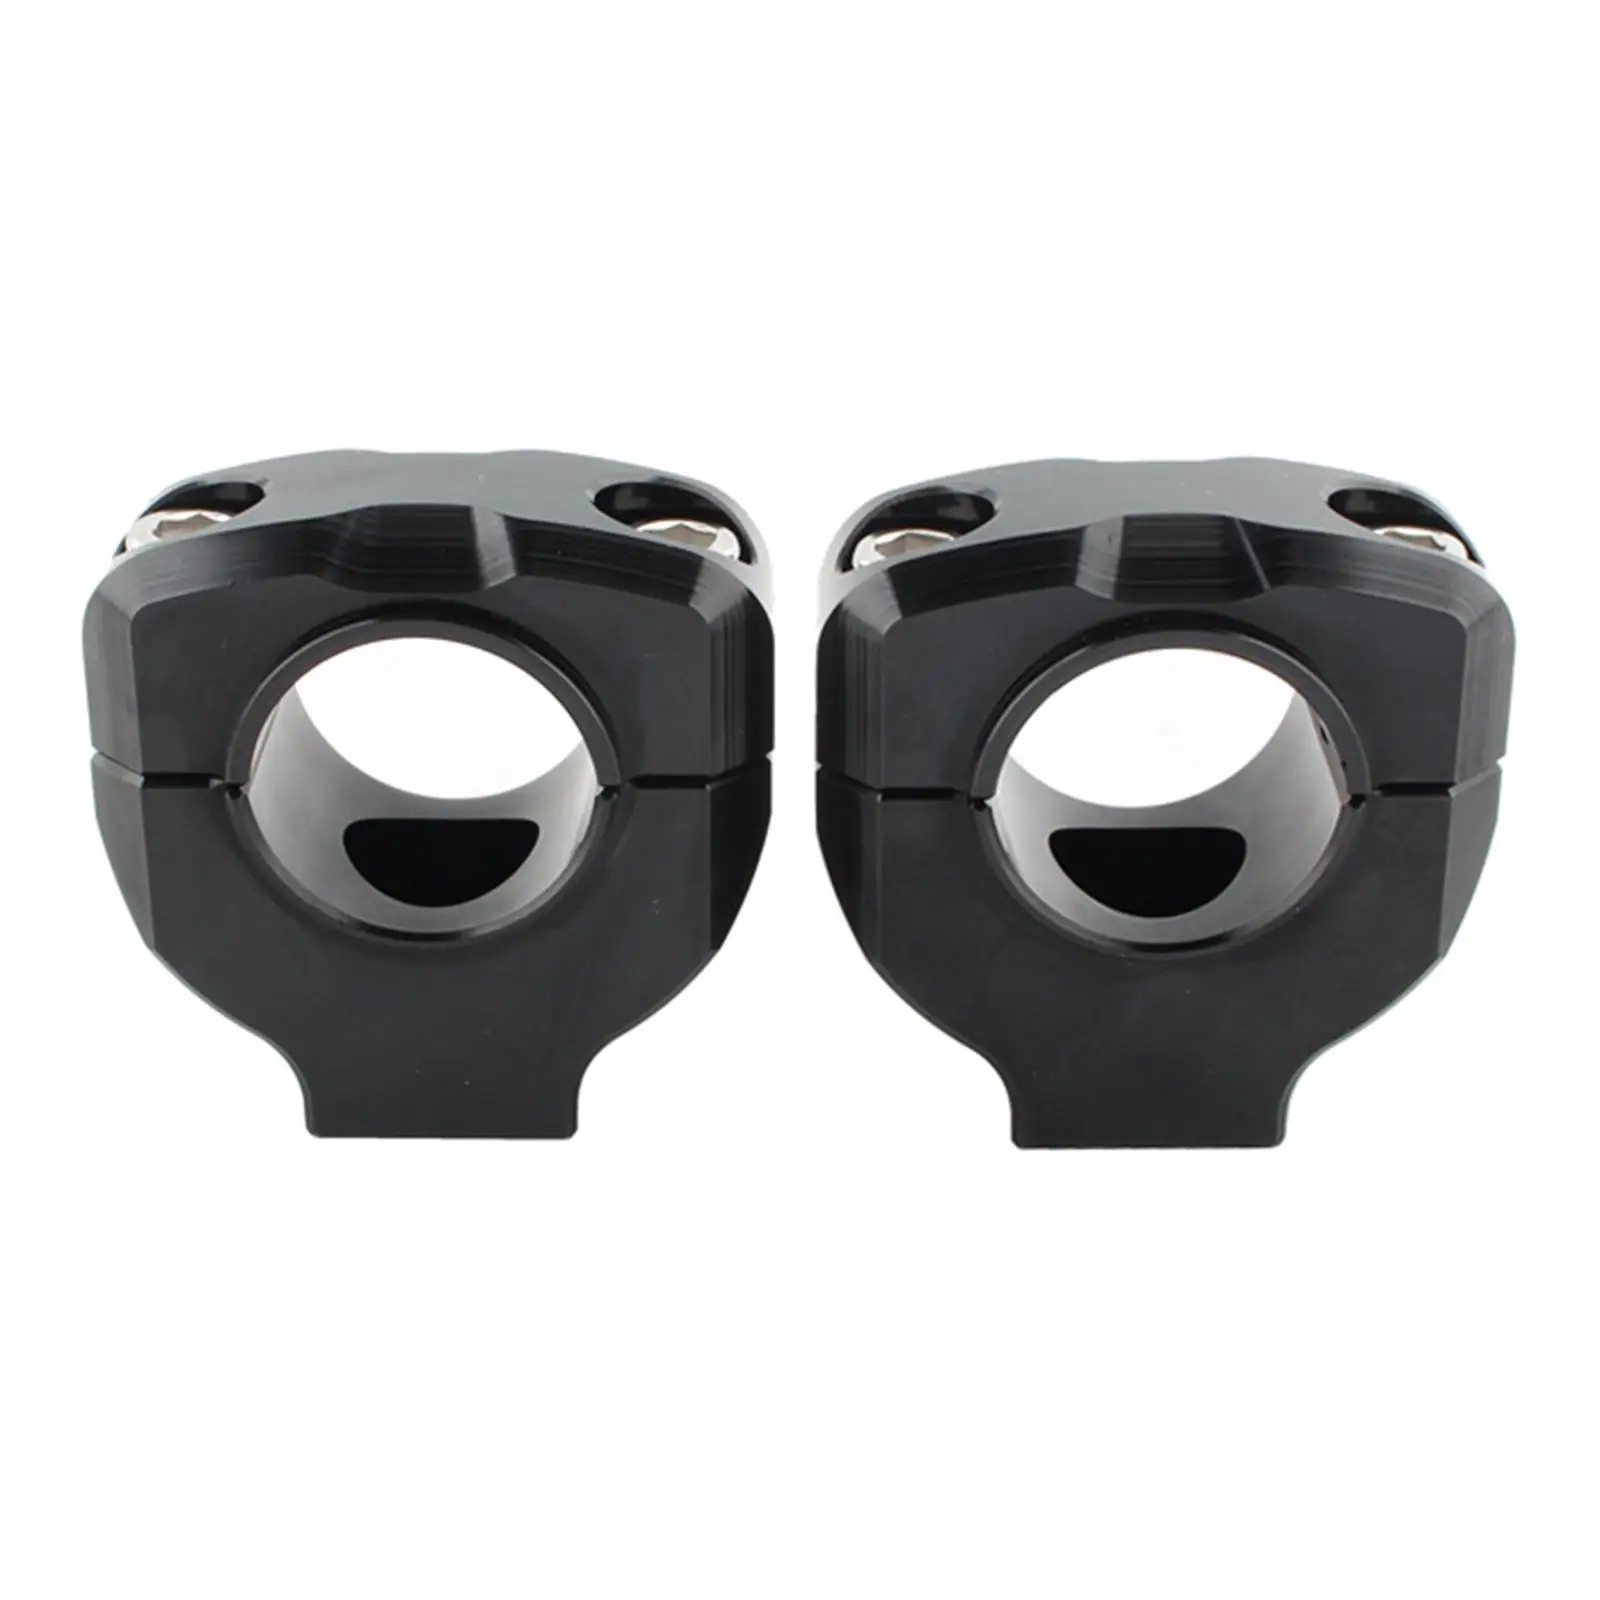 1 pair of universal motorcycle 28mm 1/8 inch handlebar riser clamp   Lifter - £16.88 GBP